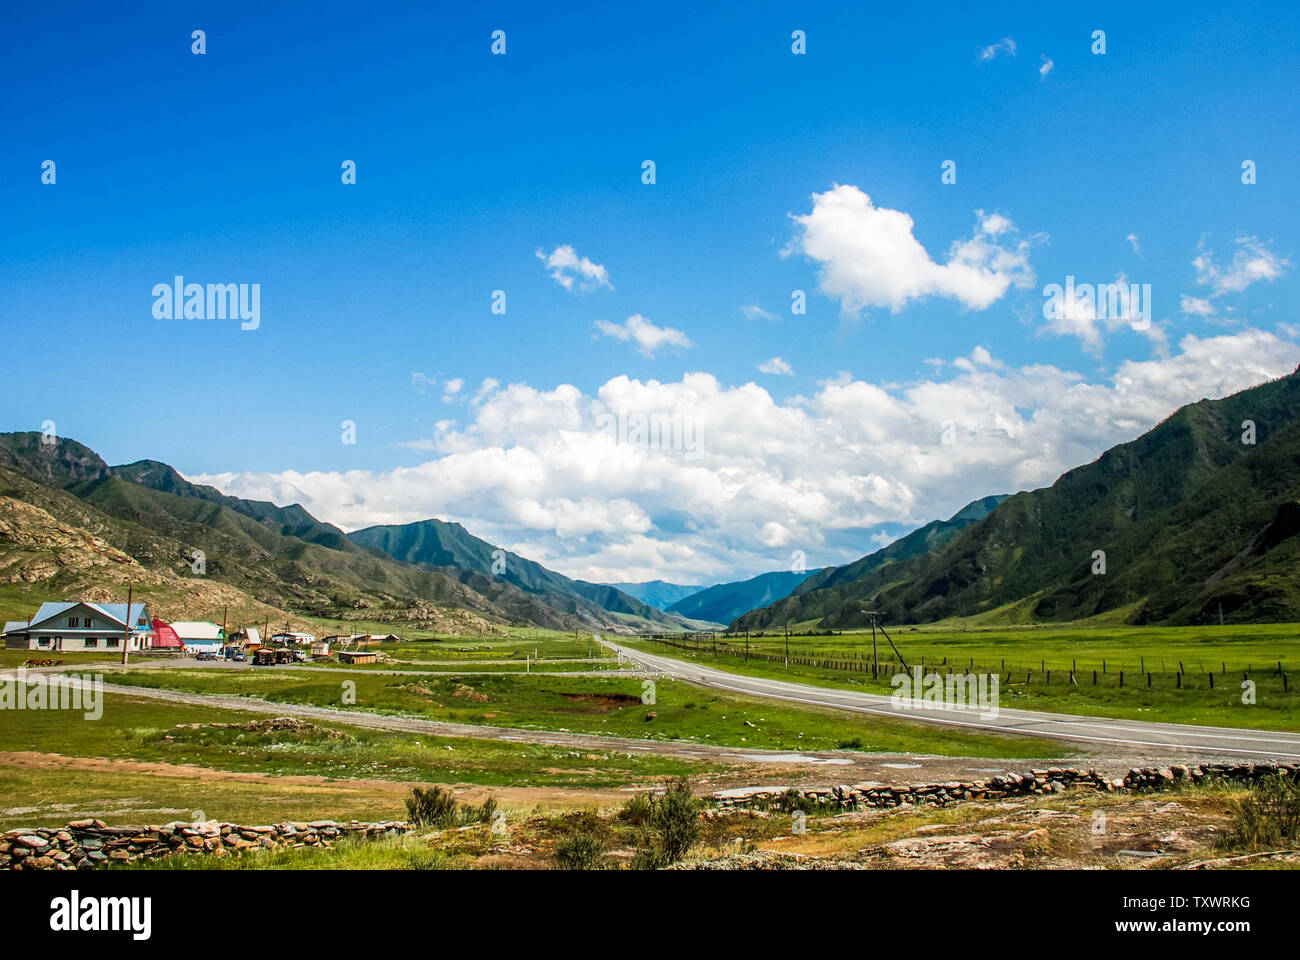 Scenic mountain road trip in sunny day Stock Photo